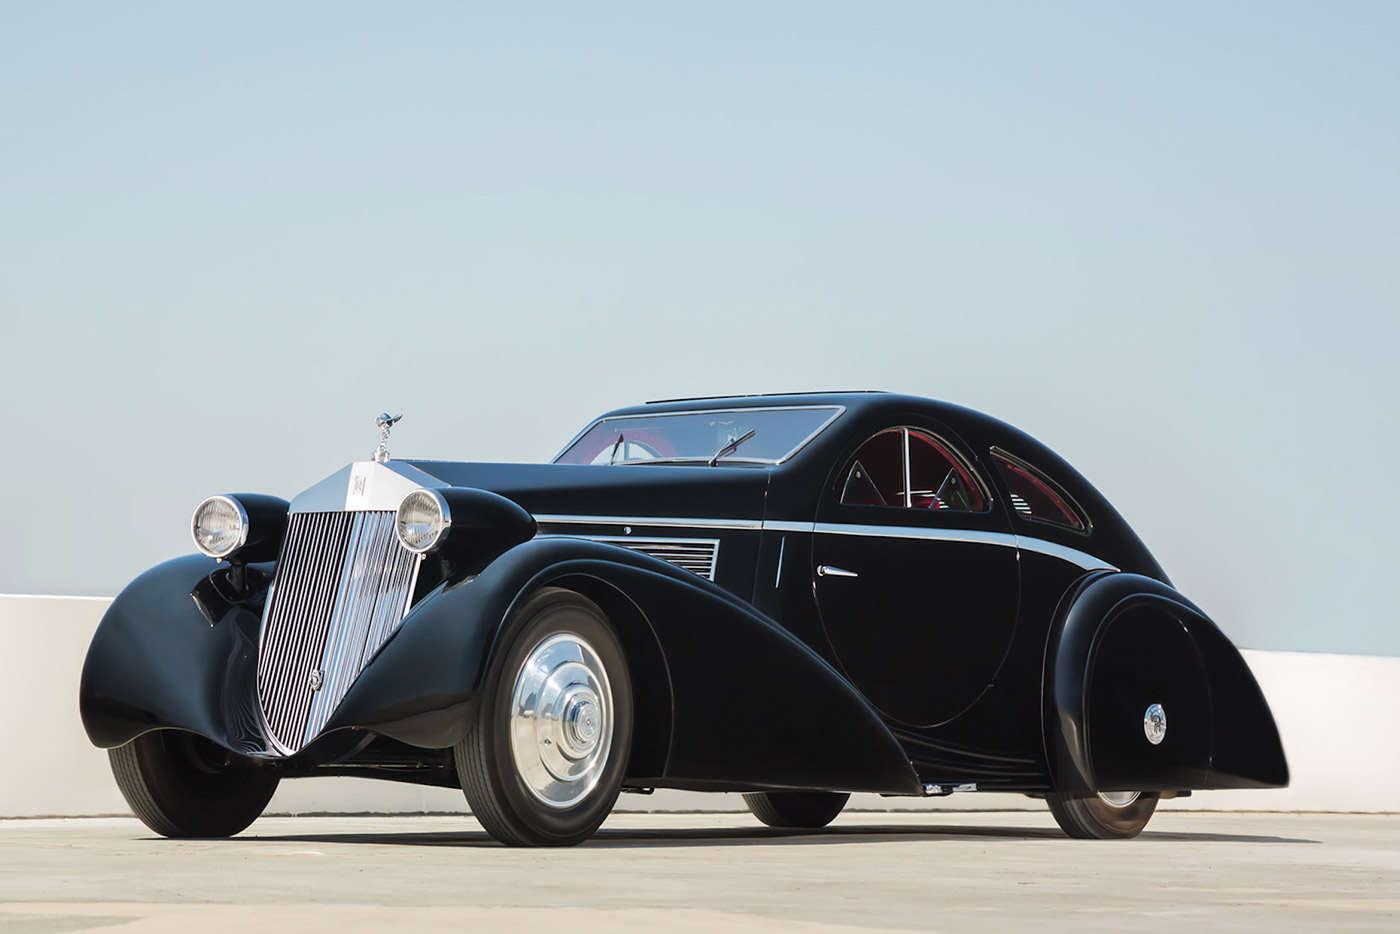 <strong>1925 &#x201C;Round Door&#x201D; Rolls-Royce Phantom</strong>: Re-bodied in 1932, the Round-Door Rolls is known for its sinuous body, low profile, and most of all, the perfectly circular doors.